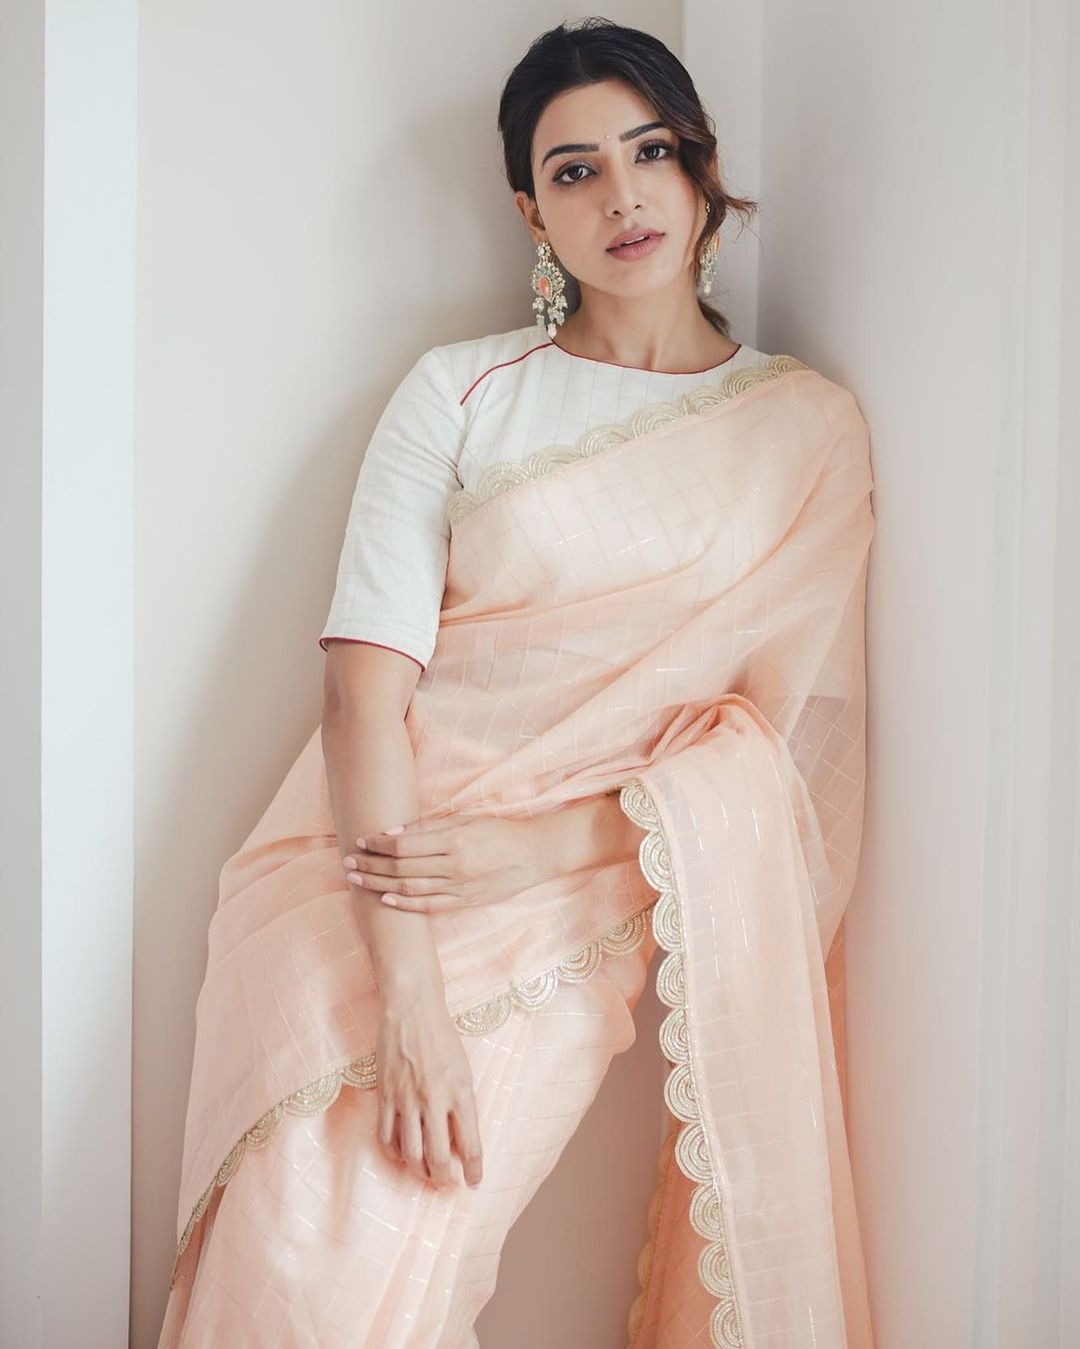 It seems Samantha believes in the saying less is more with this saree look